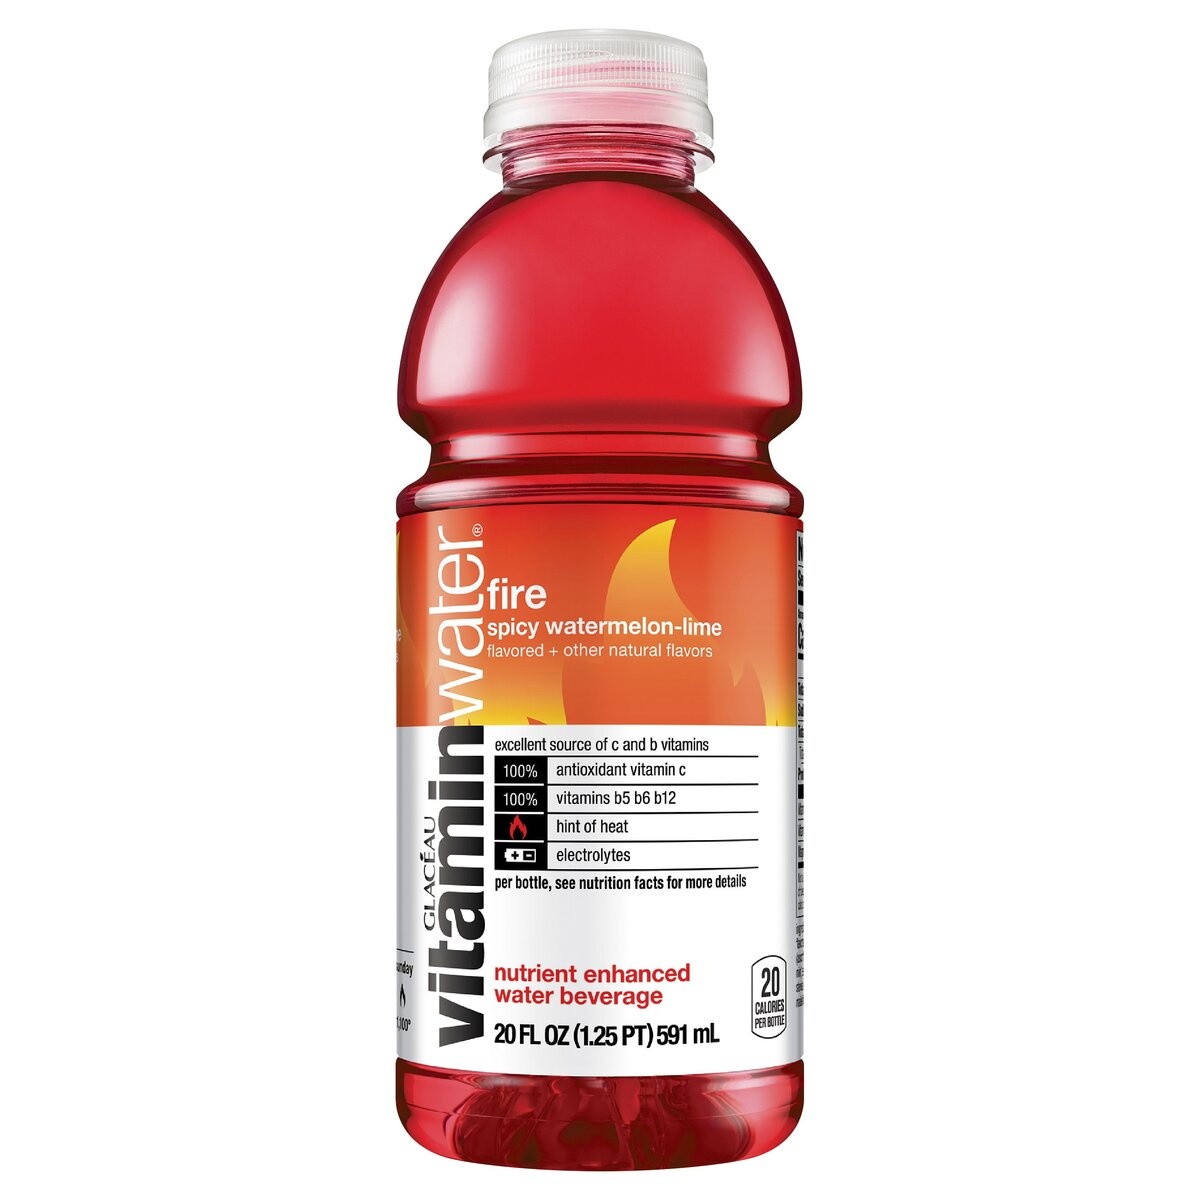 slide 4 of 4, smartwater Vitaminwater Fire Spicy Watermelon-Lime Water Beverage, 20 fl oz